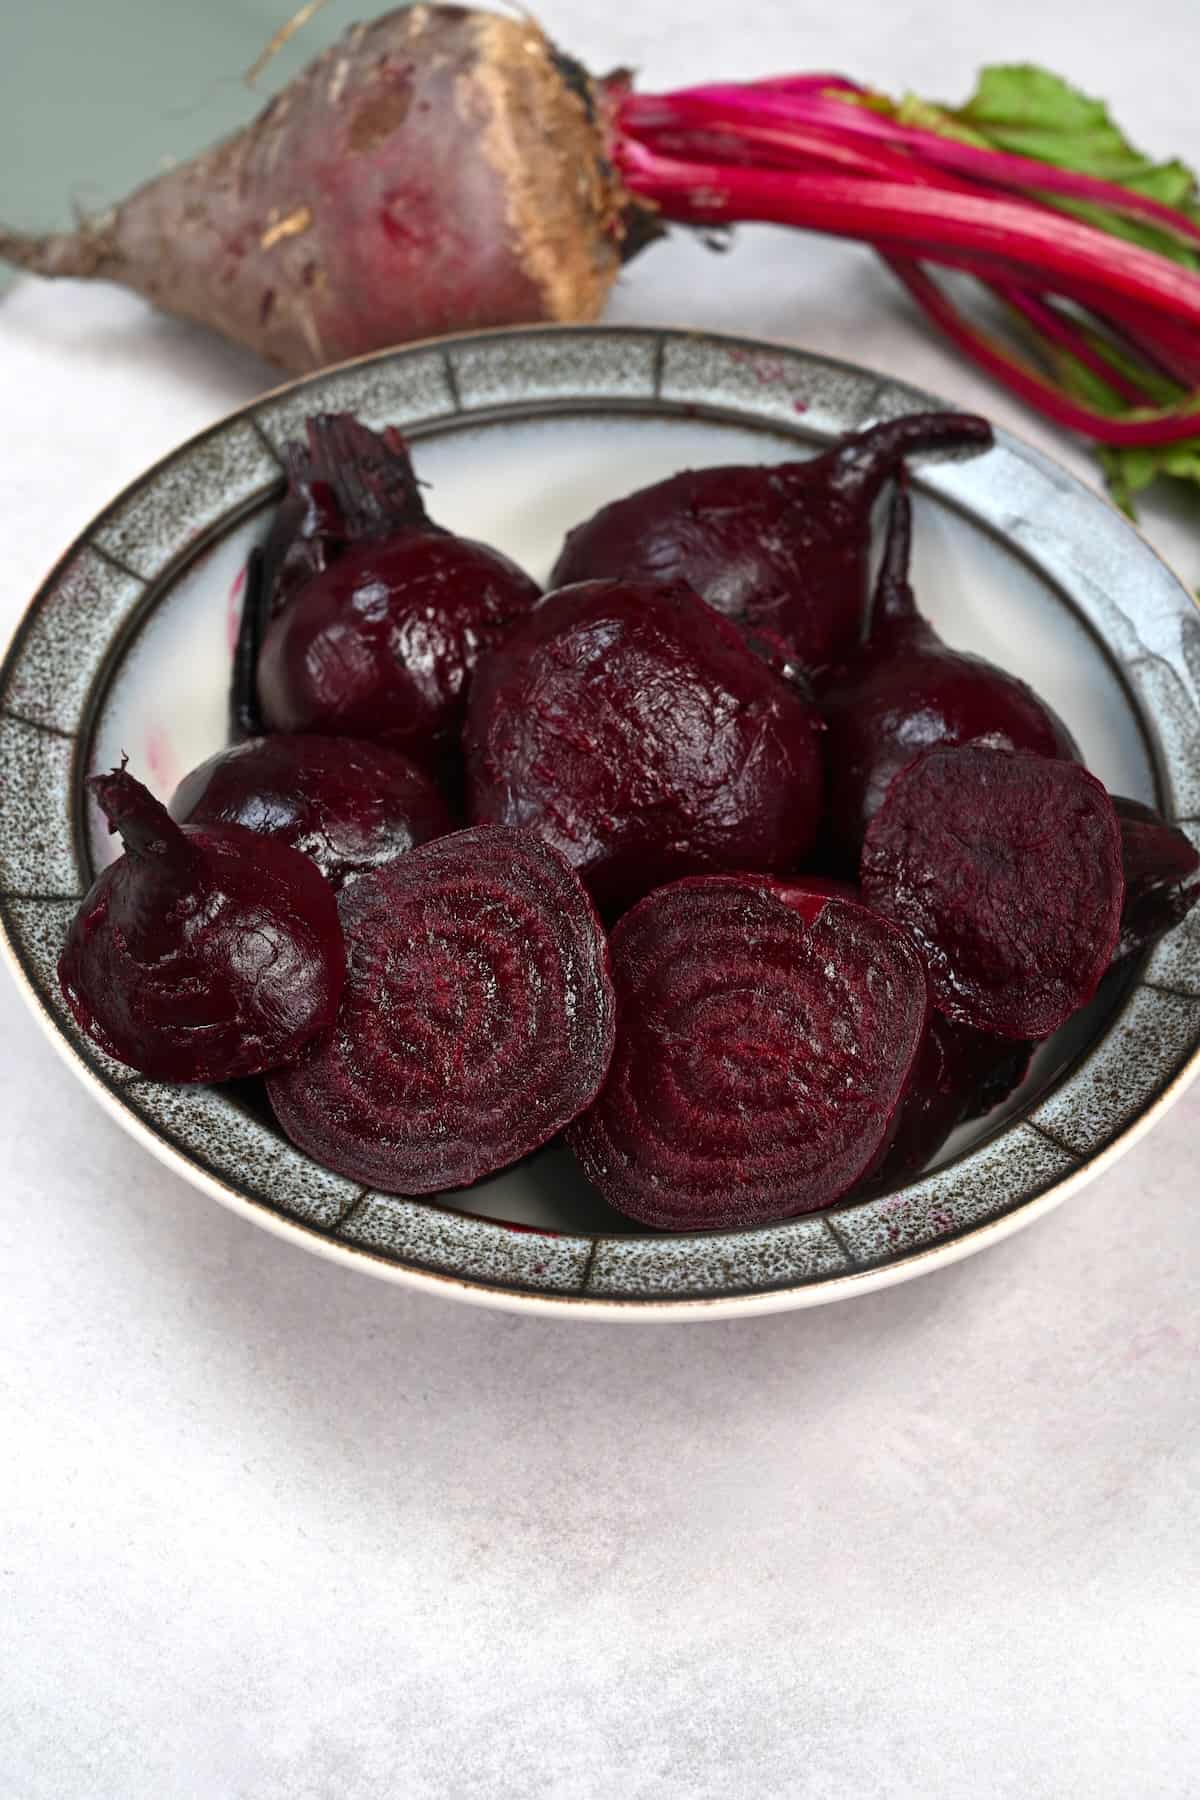 Roasted beets cut in halves on a plate